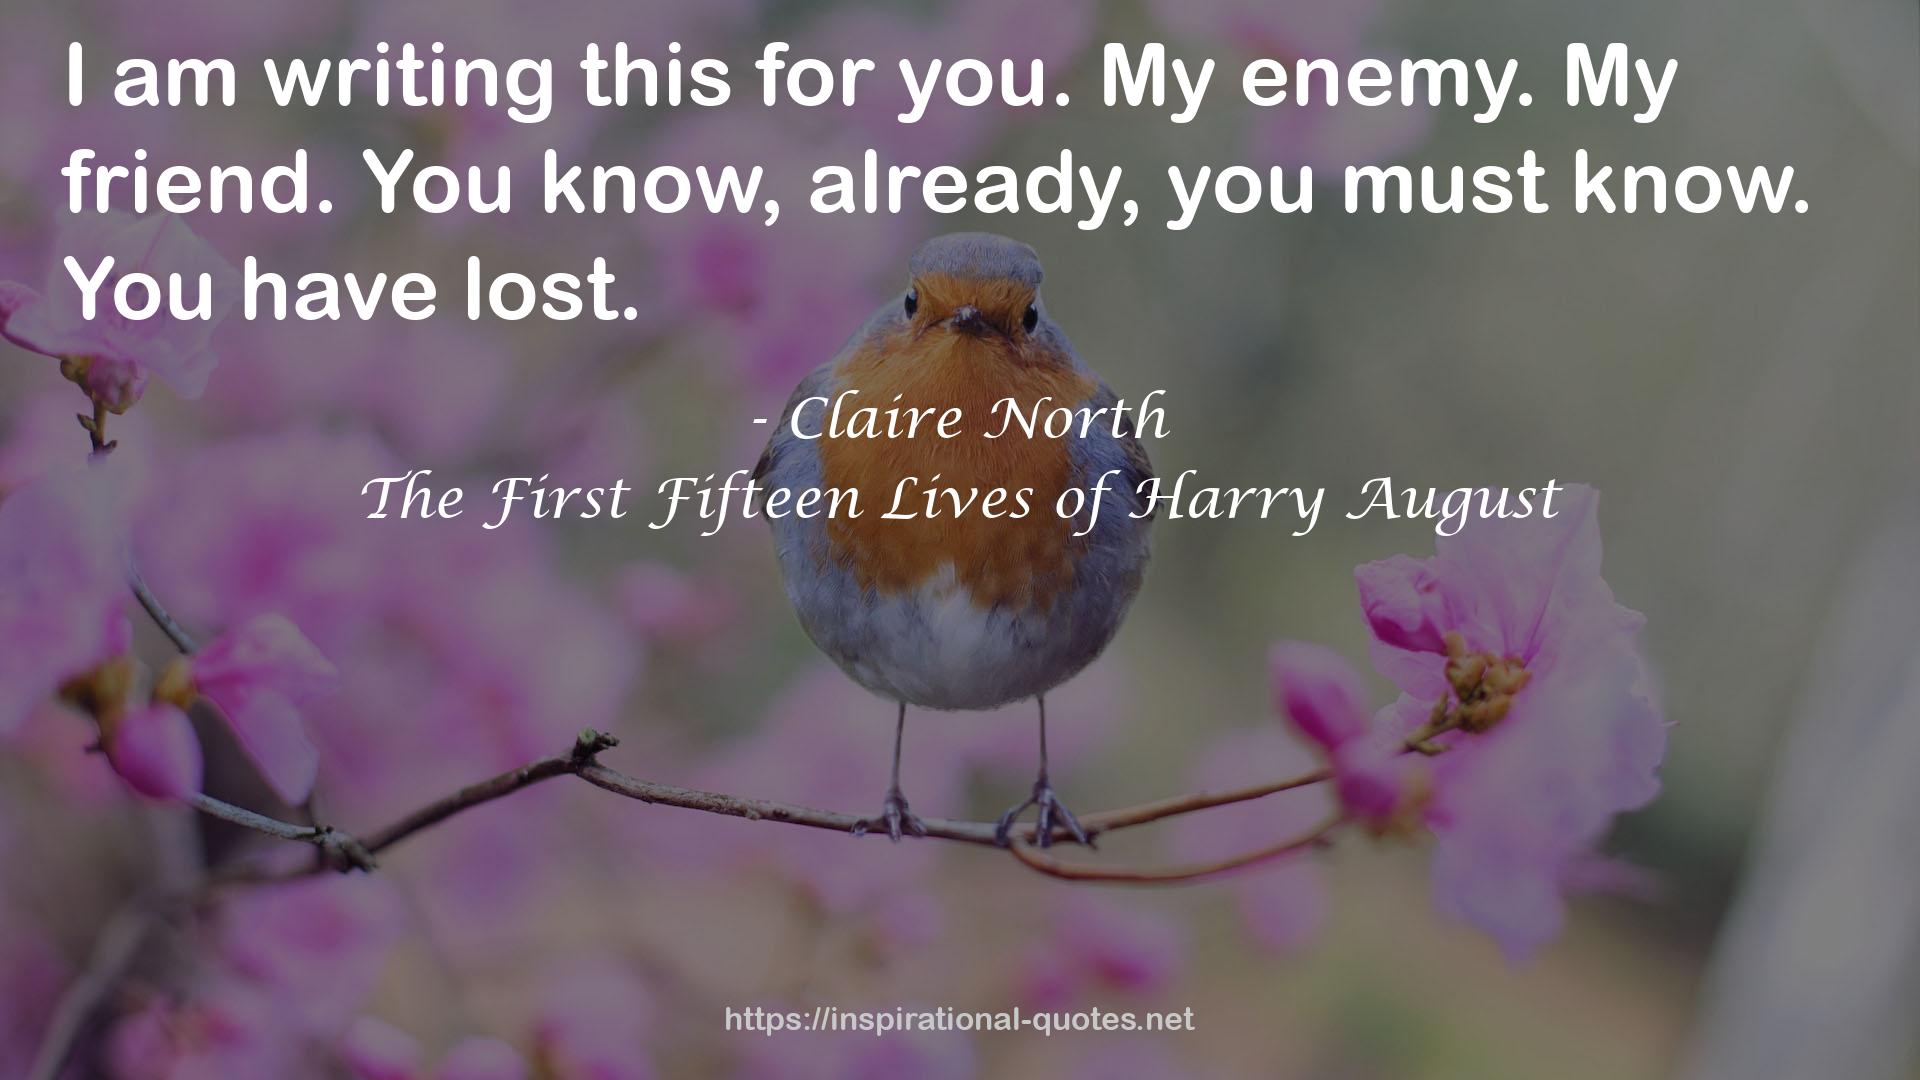 The First Fifteen Lives of Harry August QUOTES